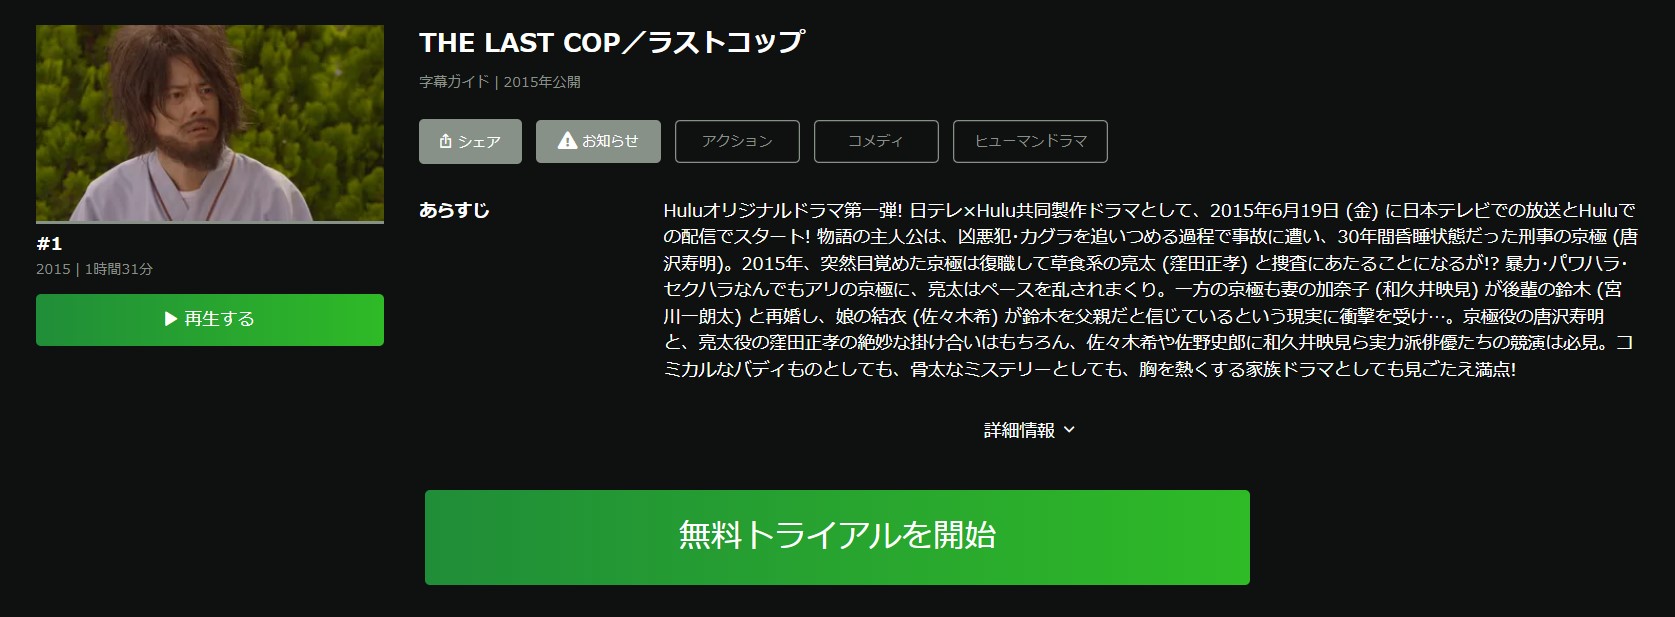 THE LAST COP/ラストコップ another story